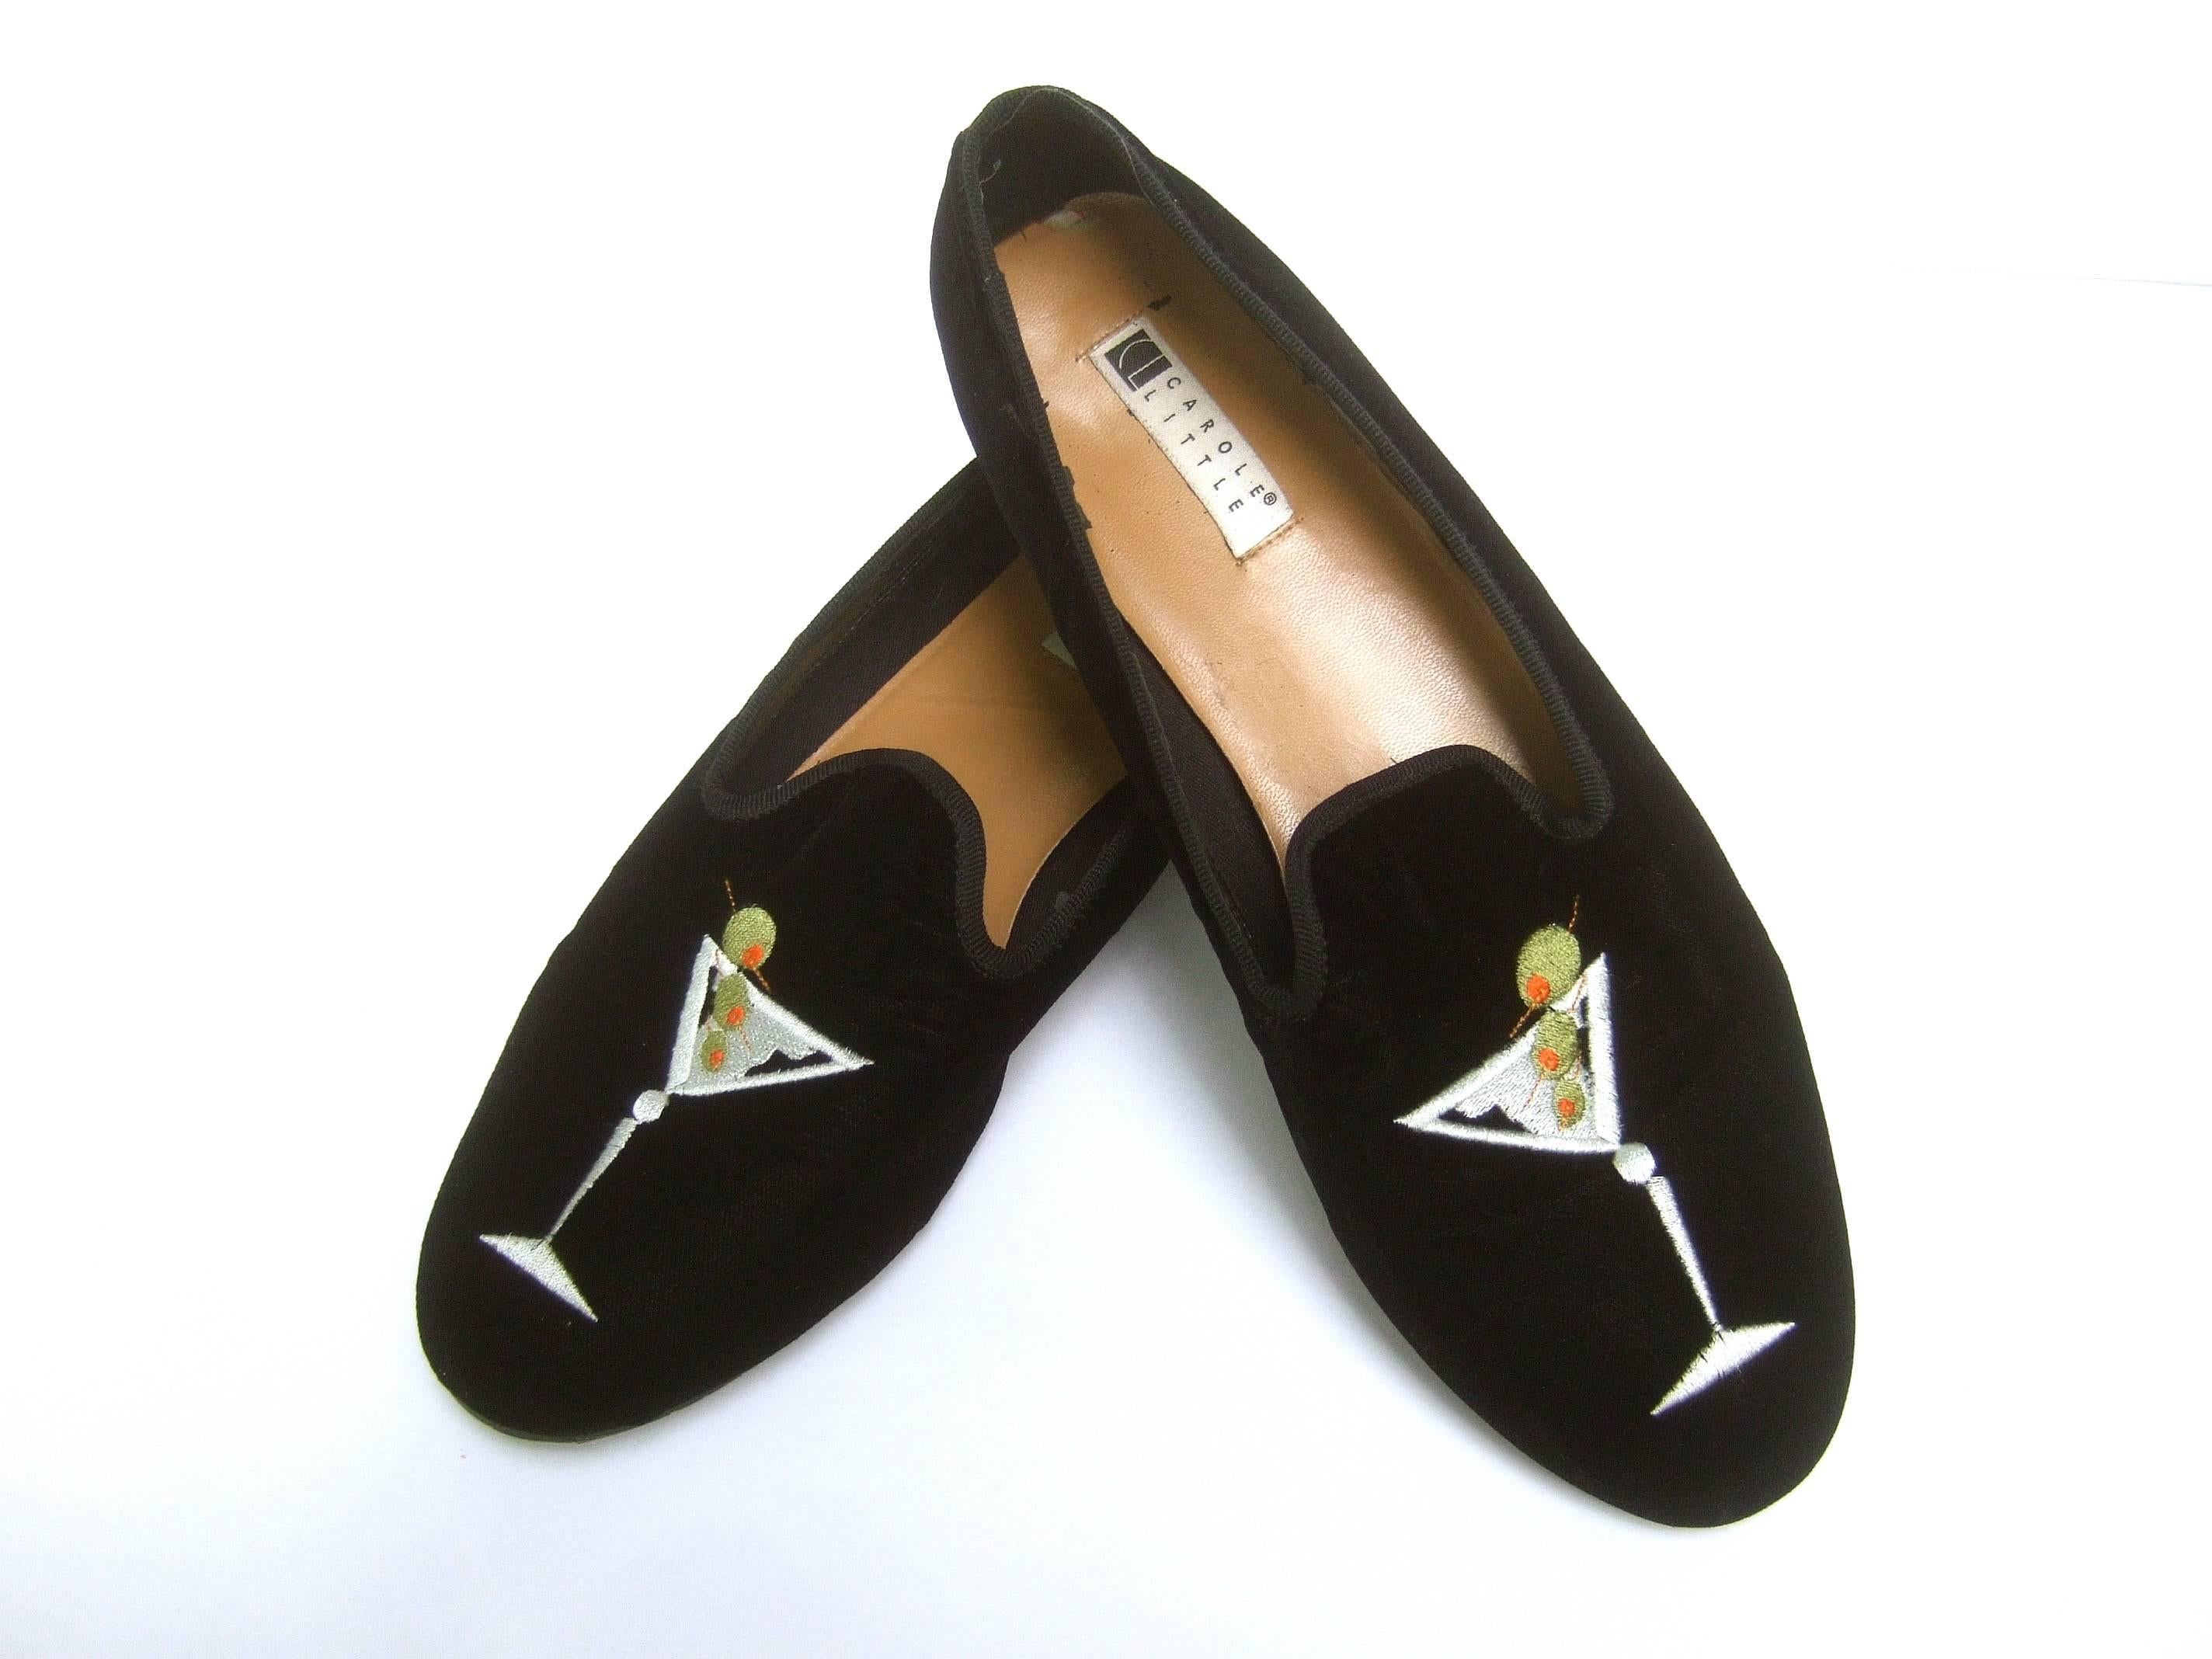 Black velvet embroidered martini glass women's shoes US Size 10 M 
The stylish slipper style shoes are covered with plush black velvet 
Each shoe is designed with an embroidered martini glass 

The interior soles are tan leather designed by Carole